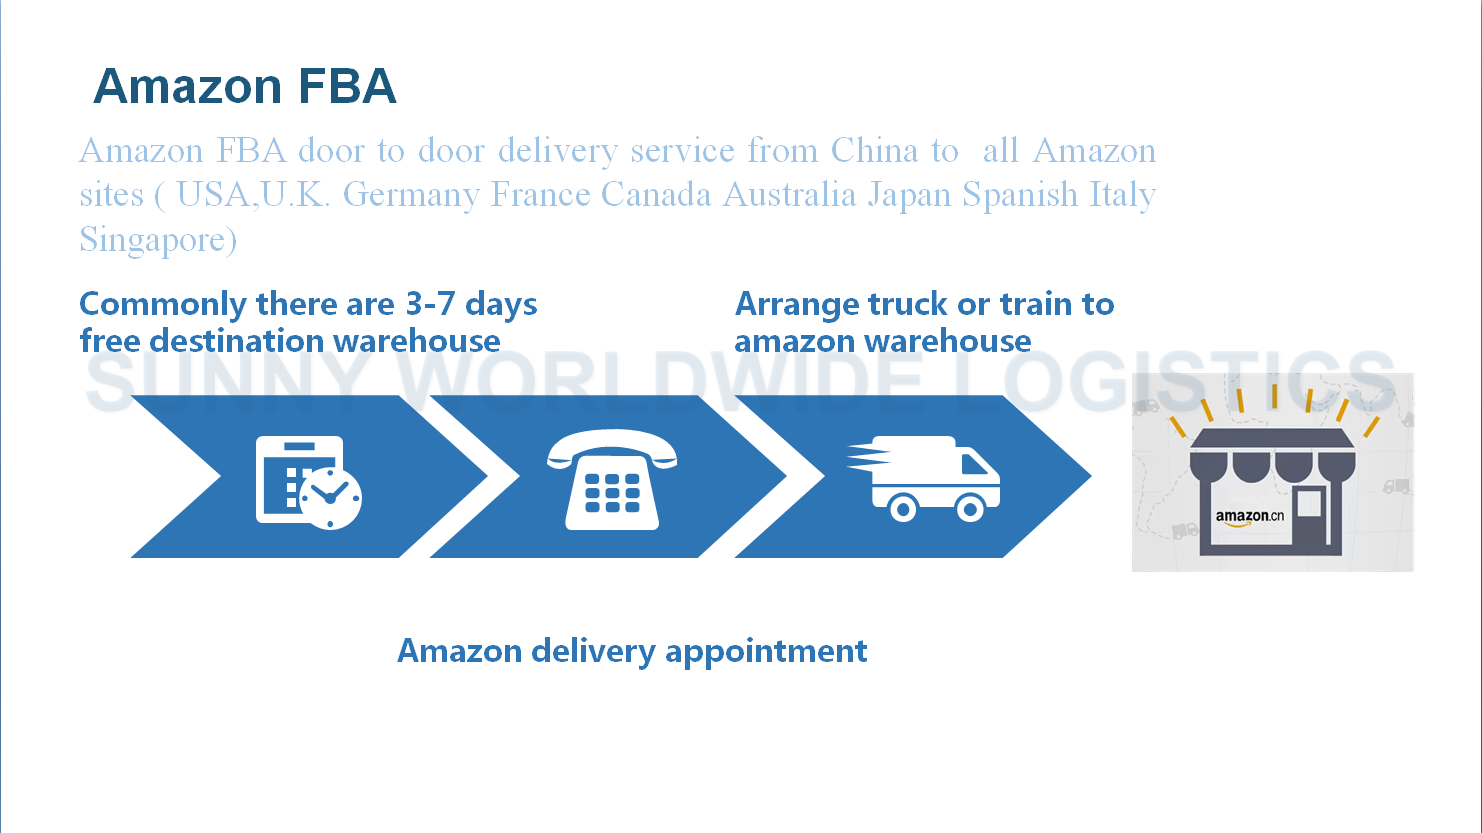 Amazon FBA shipping service air freight from Shanghai to UK